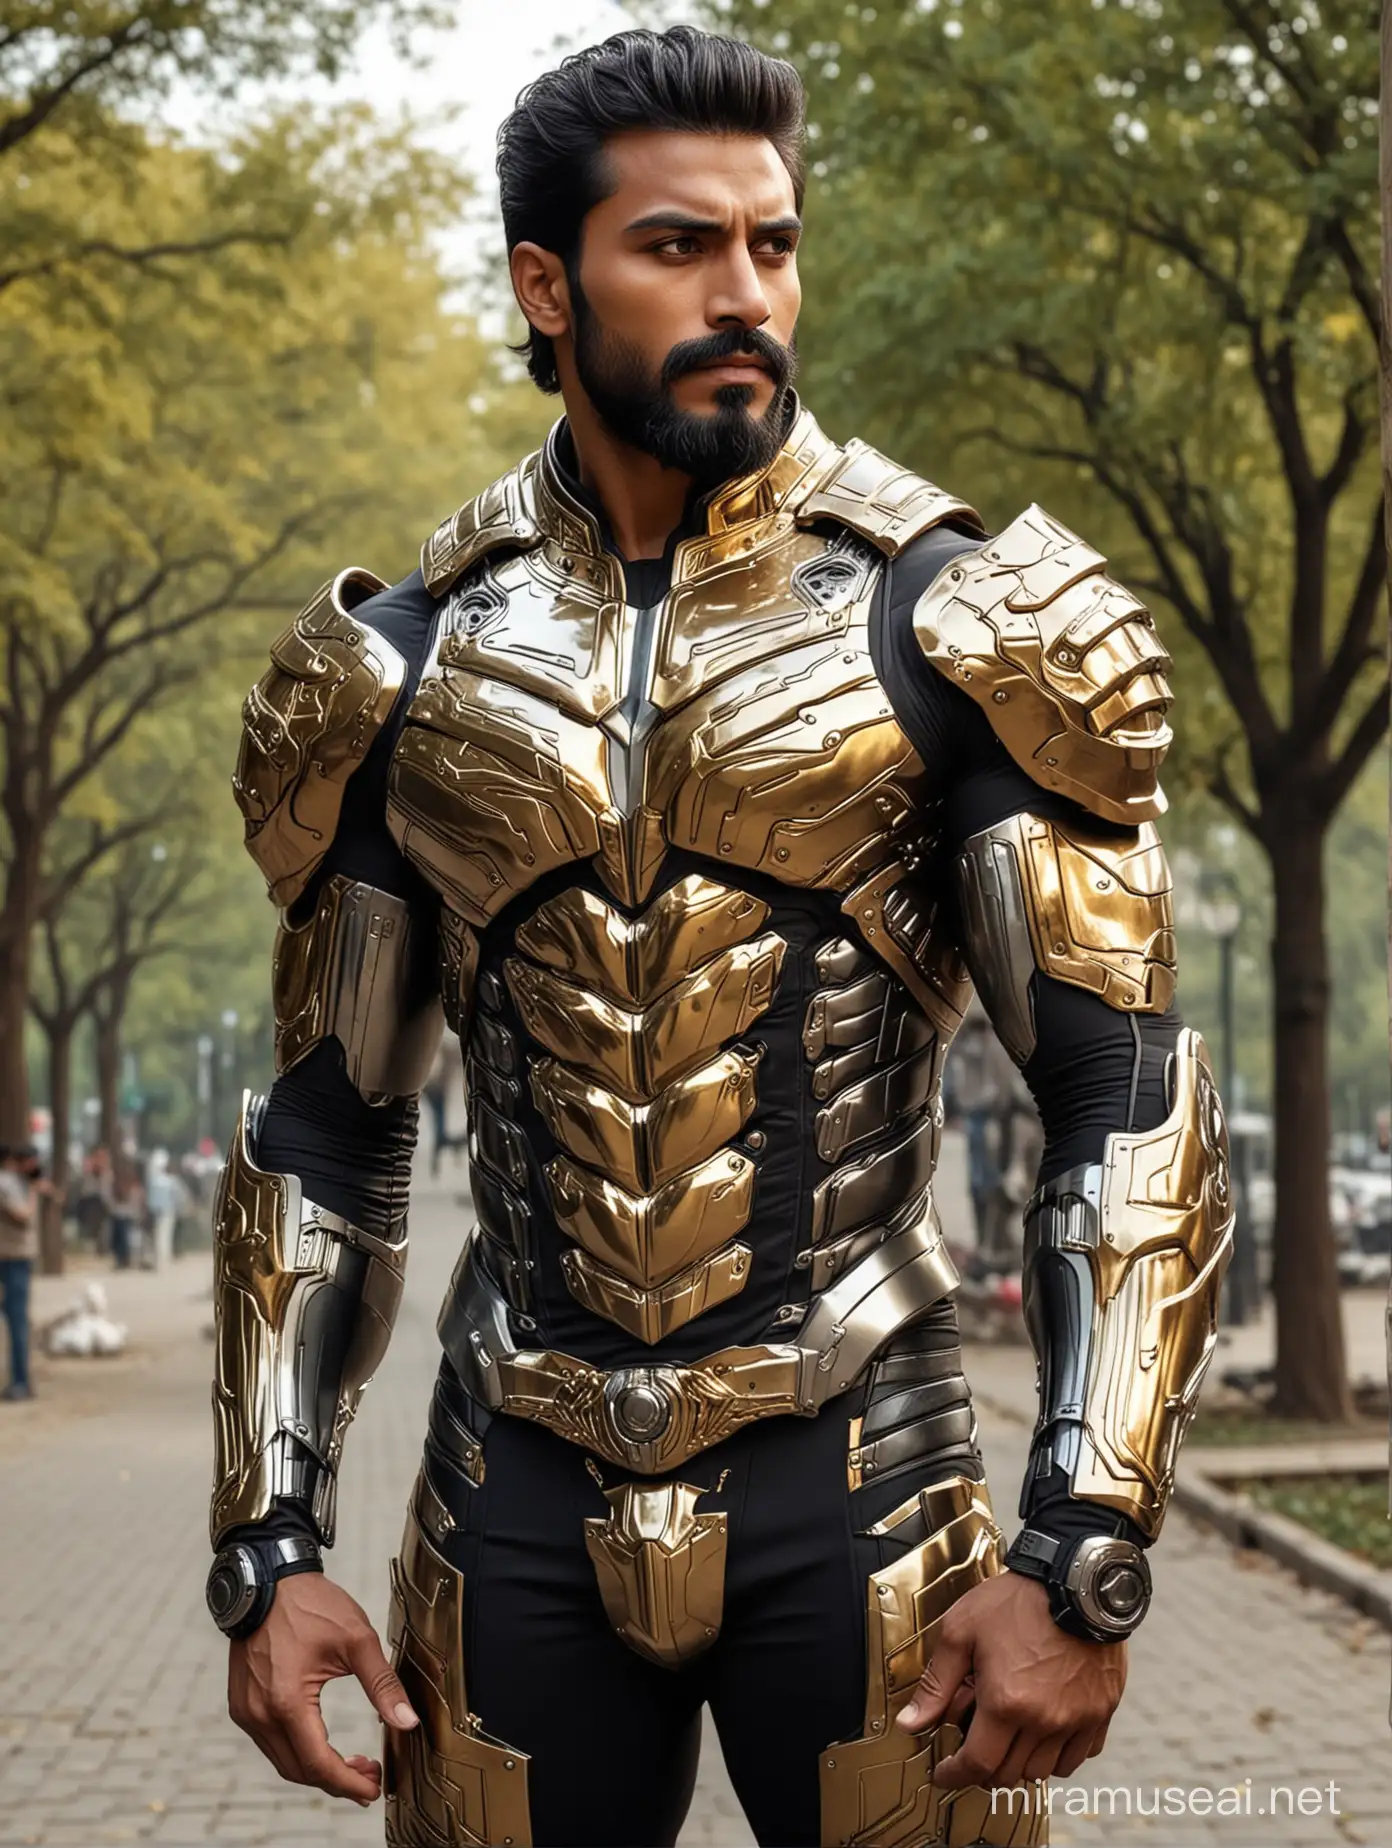 Handsome Pakistani Bodybuilder in SciFi Armor with Firearms at Park